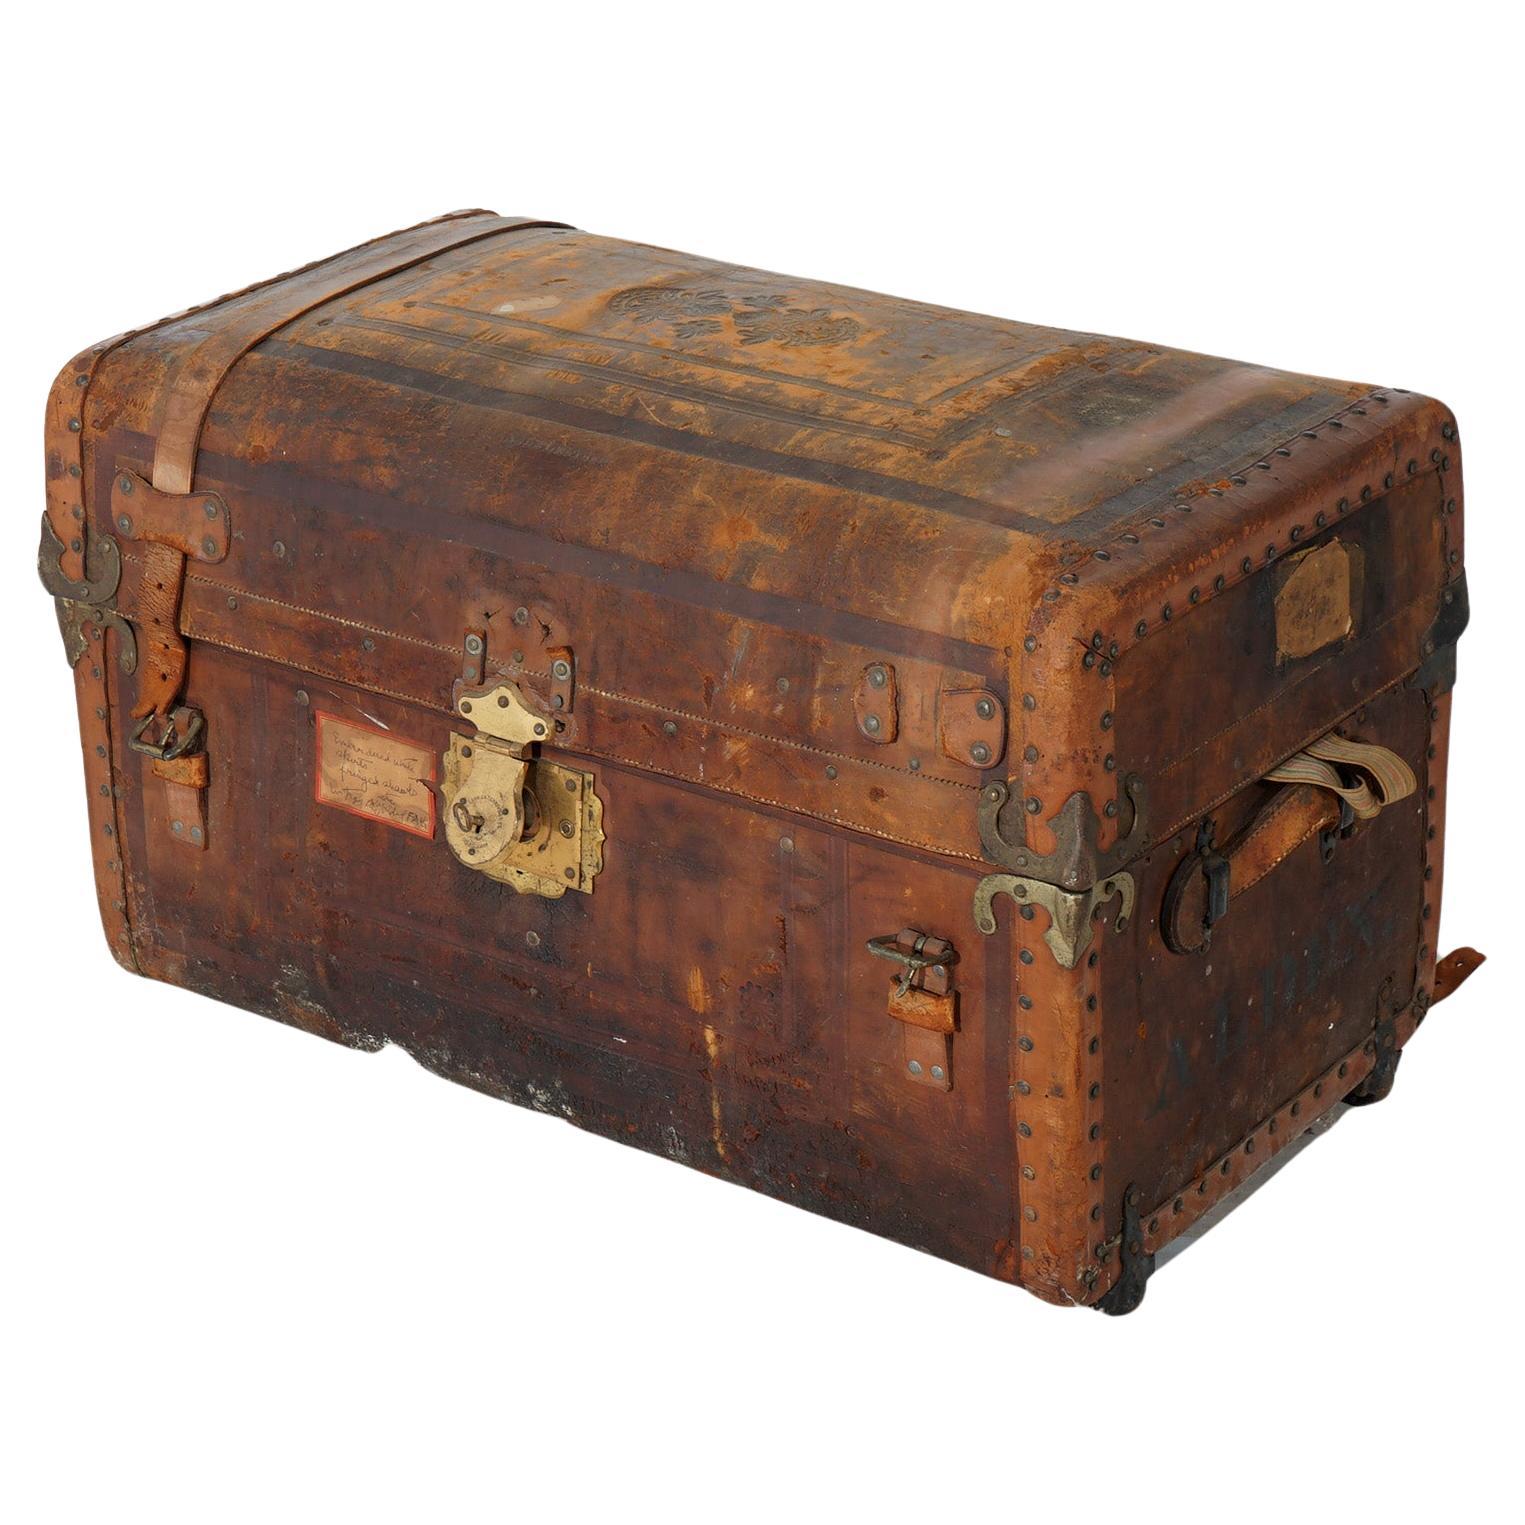 How much are old trunks worth?